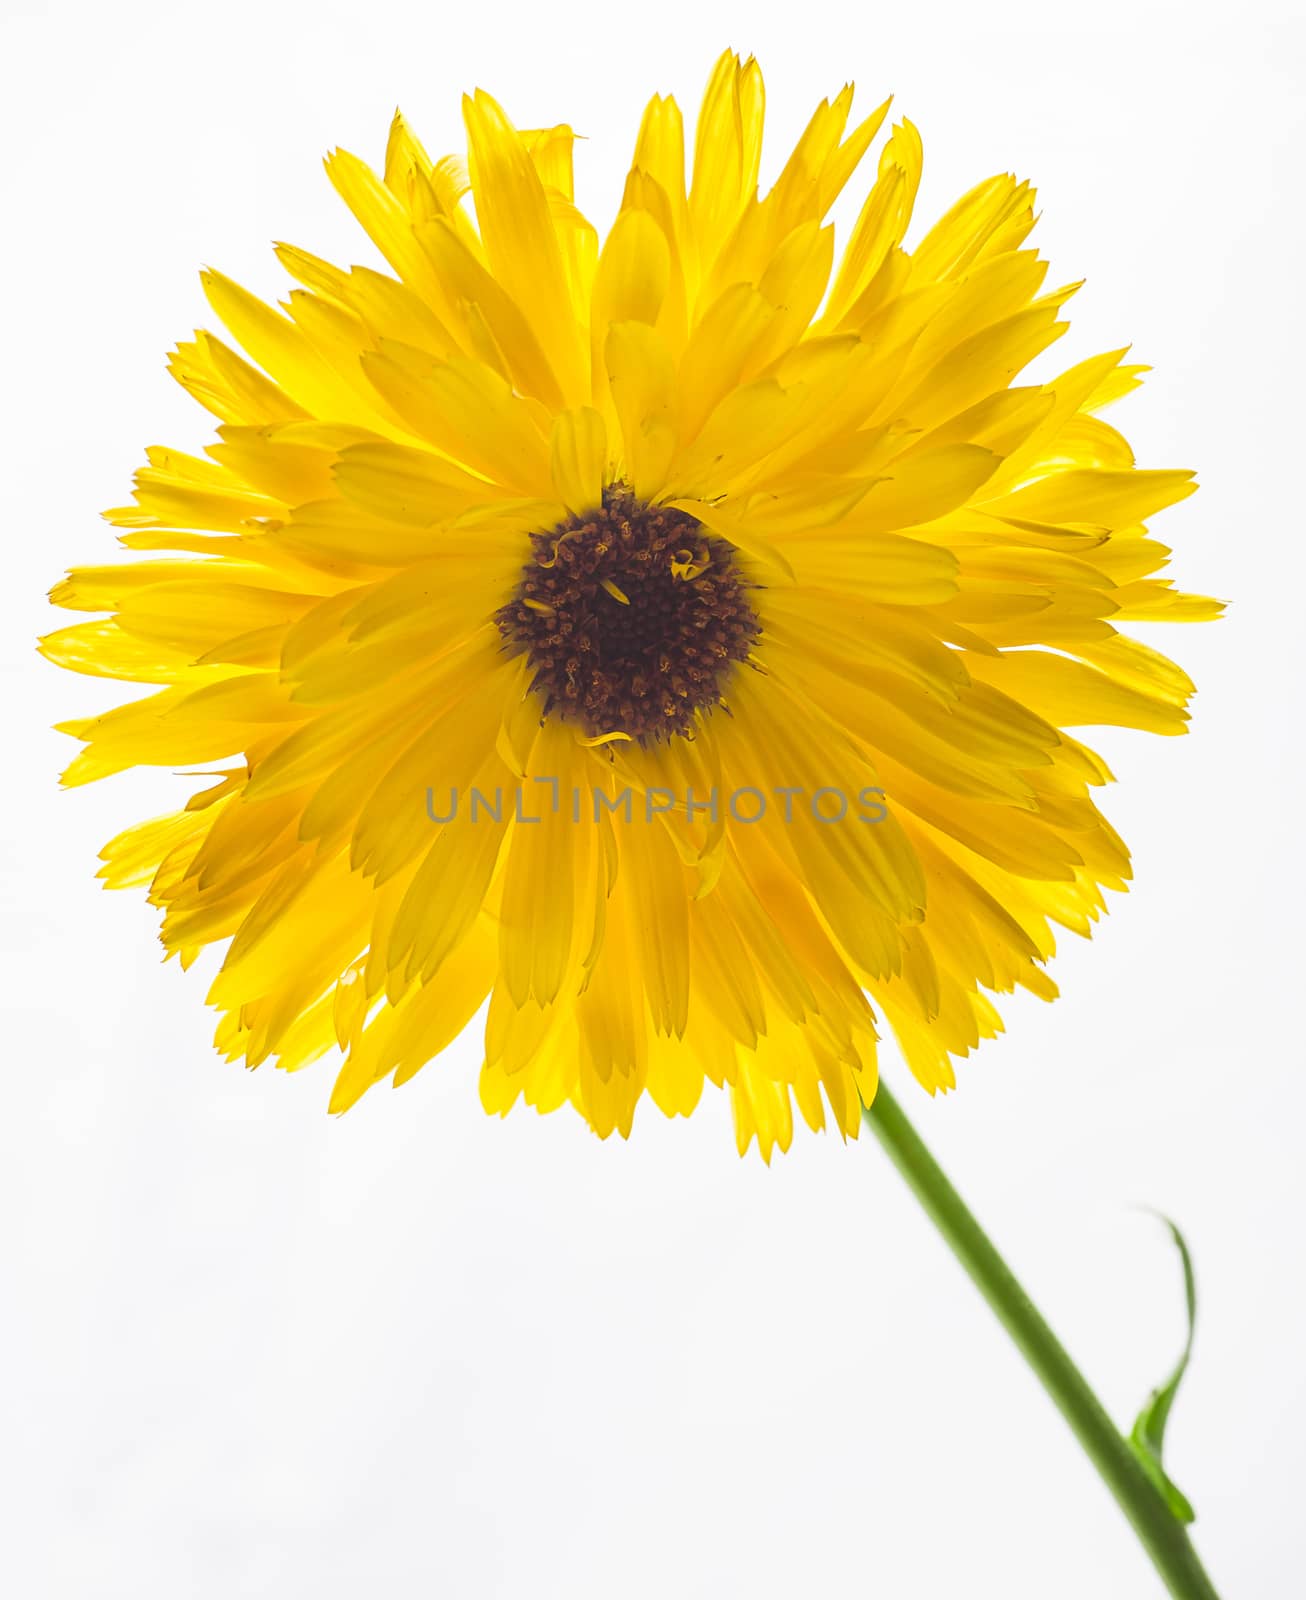 Yellow daisy flower isolated on white background